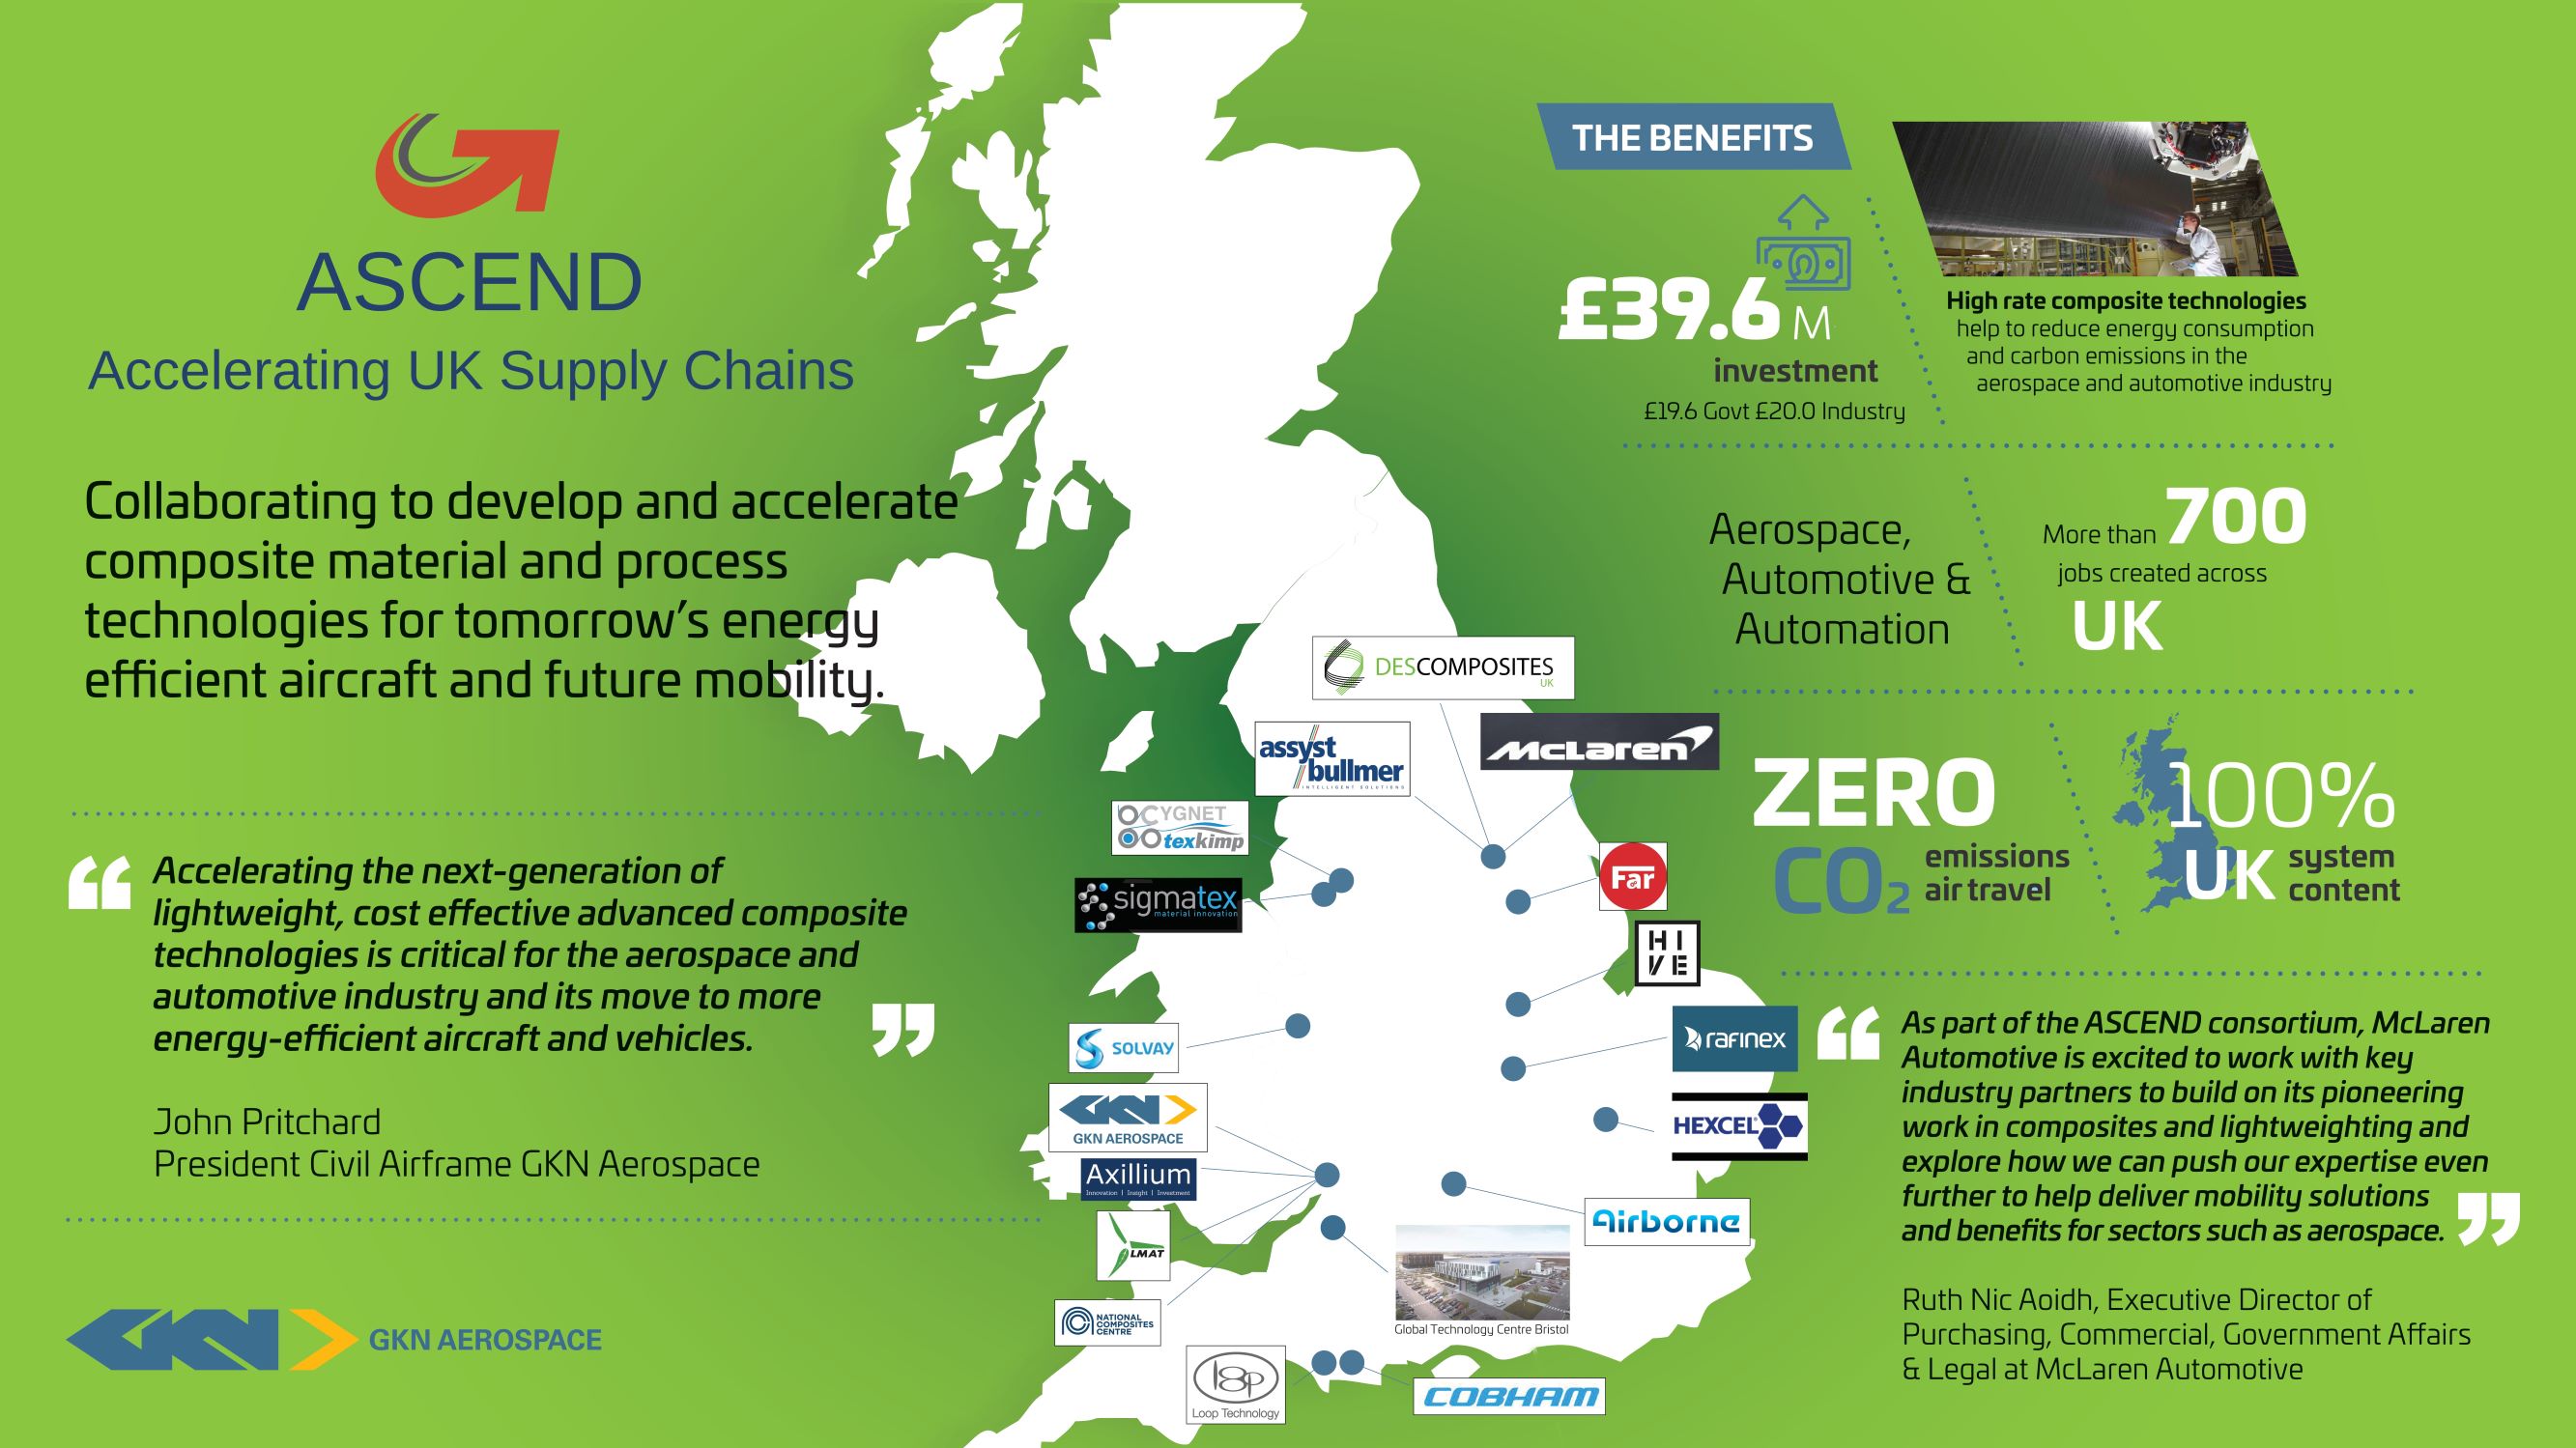 GKN Aerospace is leading a new UK industry consortium called ASCEND (Aerospace and Automotive Supply Chain Enabled Development) to develop and accelerate composite material and process technologies for the next generation of energy efficient aircraft and future mobility. Click to enlarge.